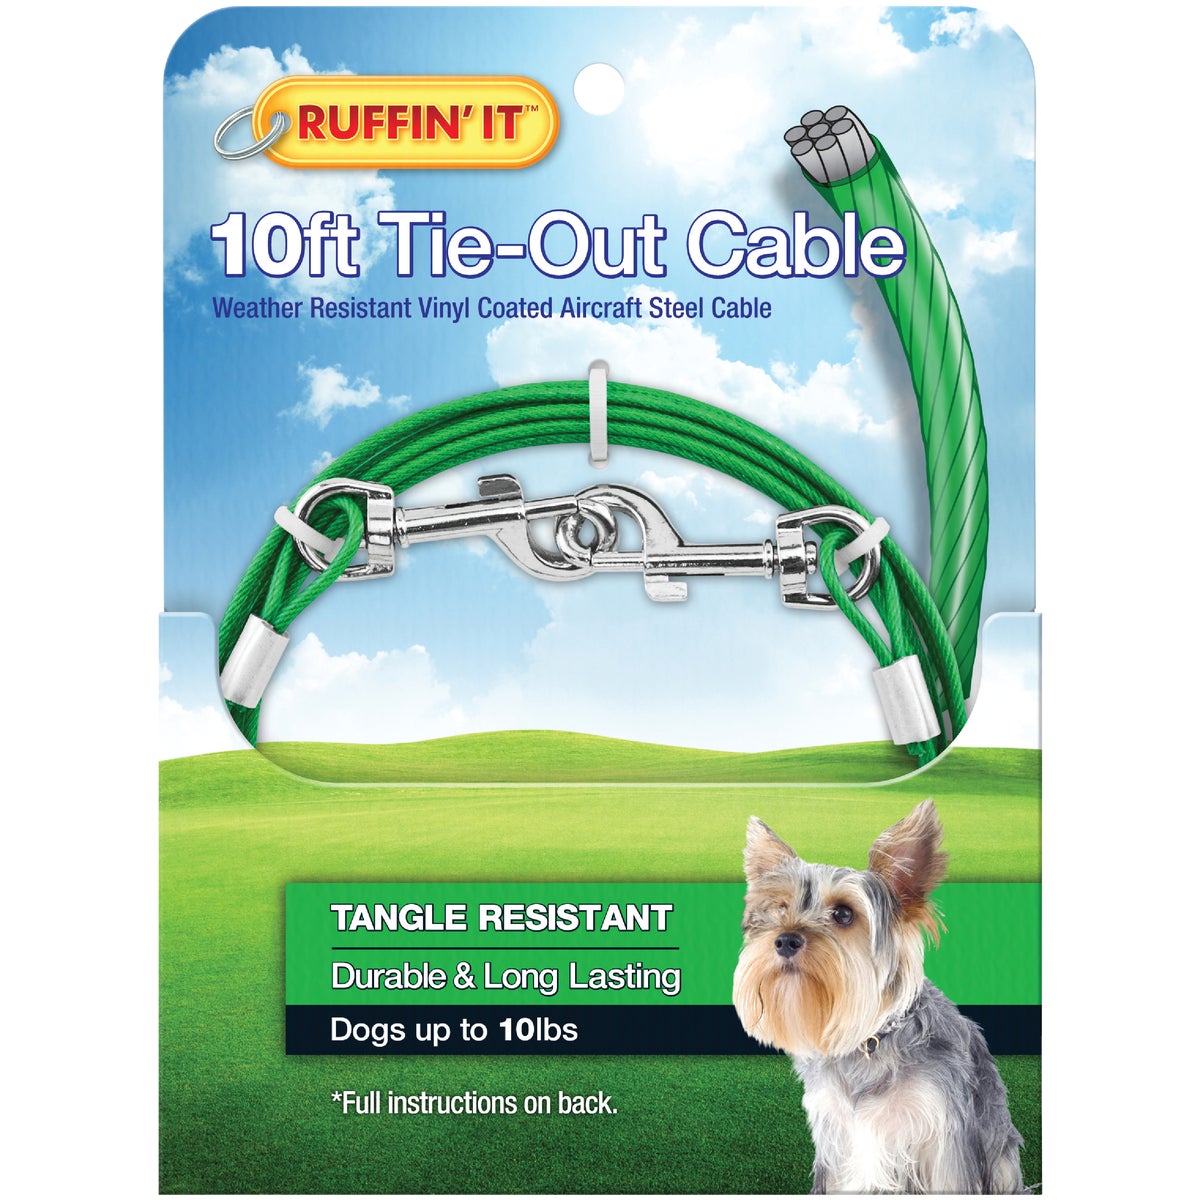 Westminster Pet Ruffin' it Tangle Resistant Small Dog Tie-Out Cable, 10 Ft.